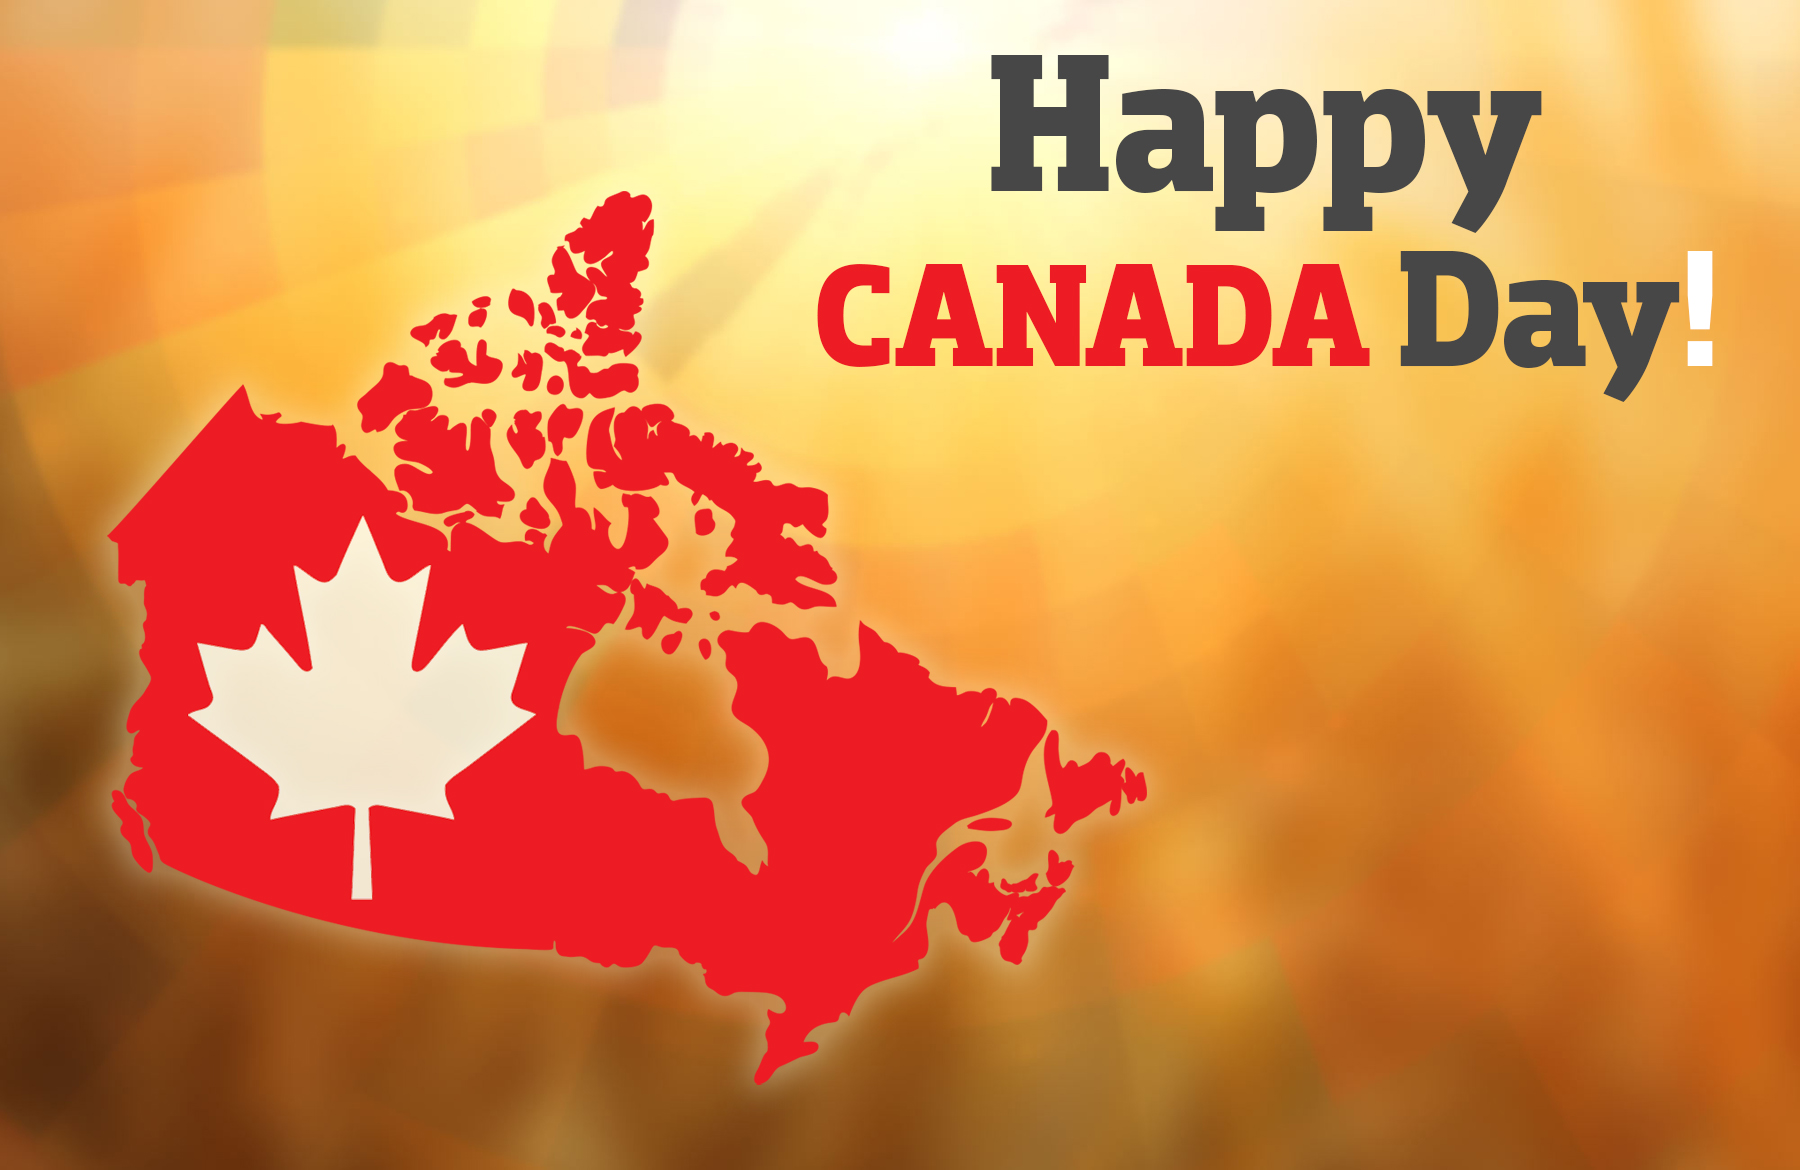 Proud to be supporting the hardworking farmers at the heart of Canadian Agriculture -working together for a more sustainable future. Happy Canada Day!